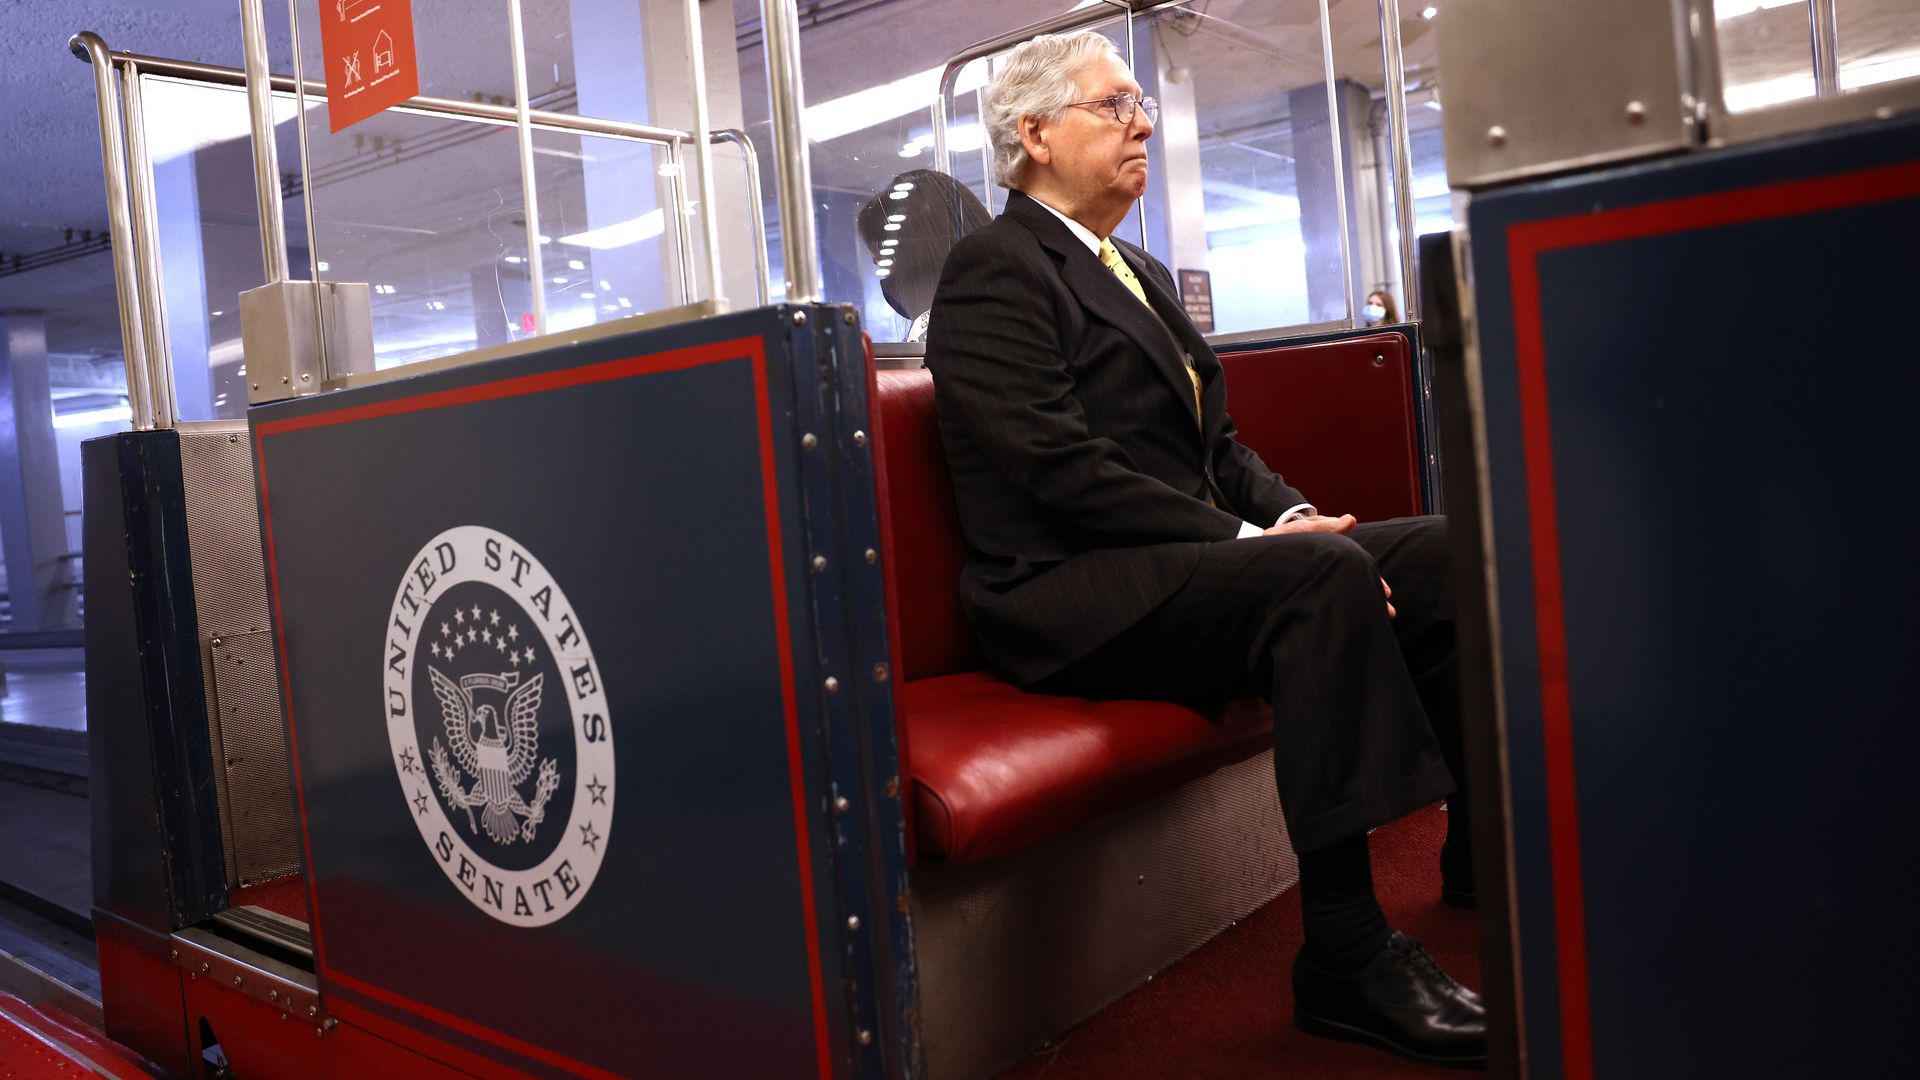 Senate Minority Leader Mitch McConnell is seen sitting in a Capitol subway car.